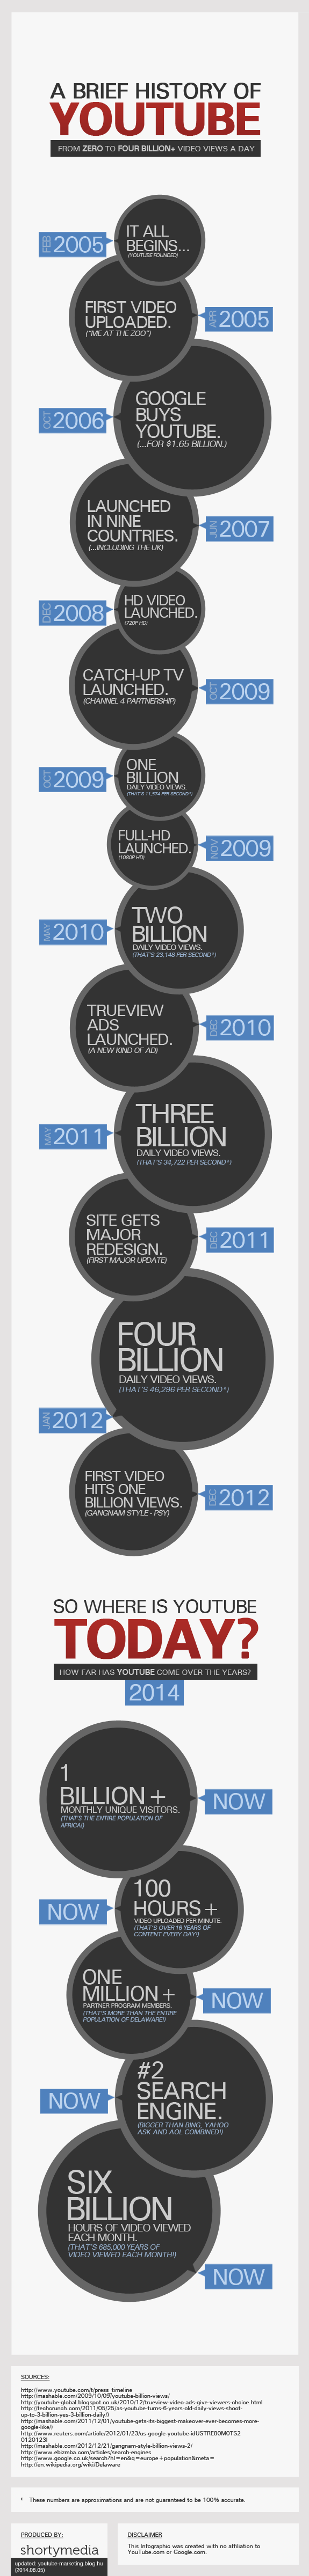 a-brief-history-of-youtube-infographic-shortymedia_updated2014.png